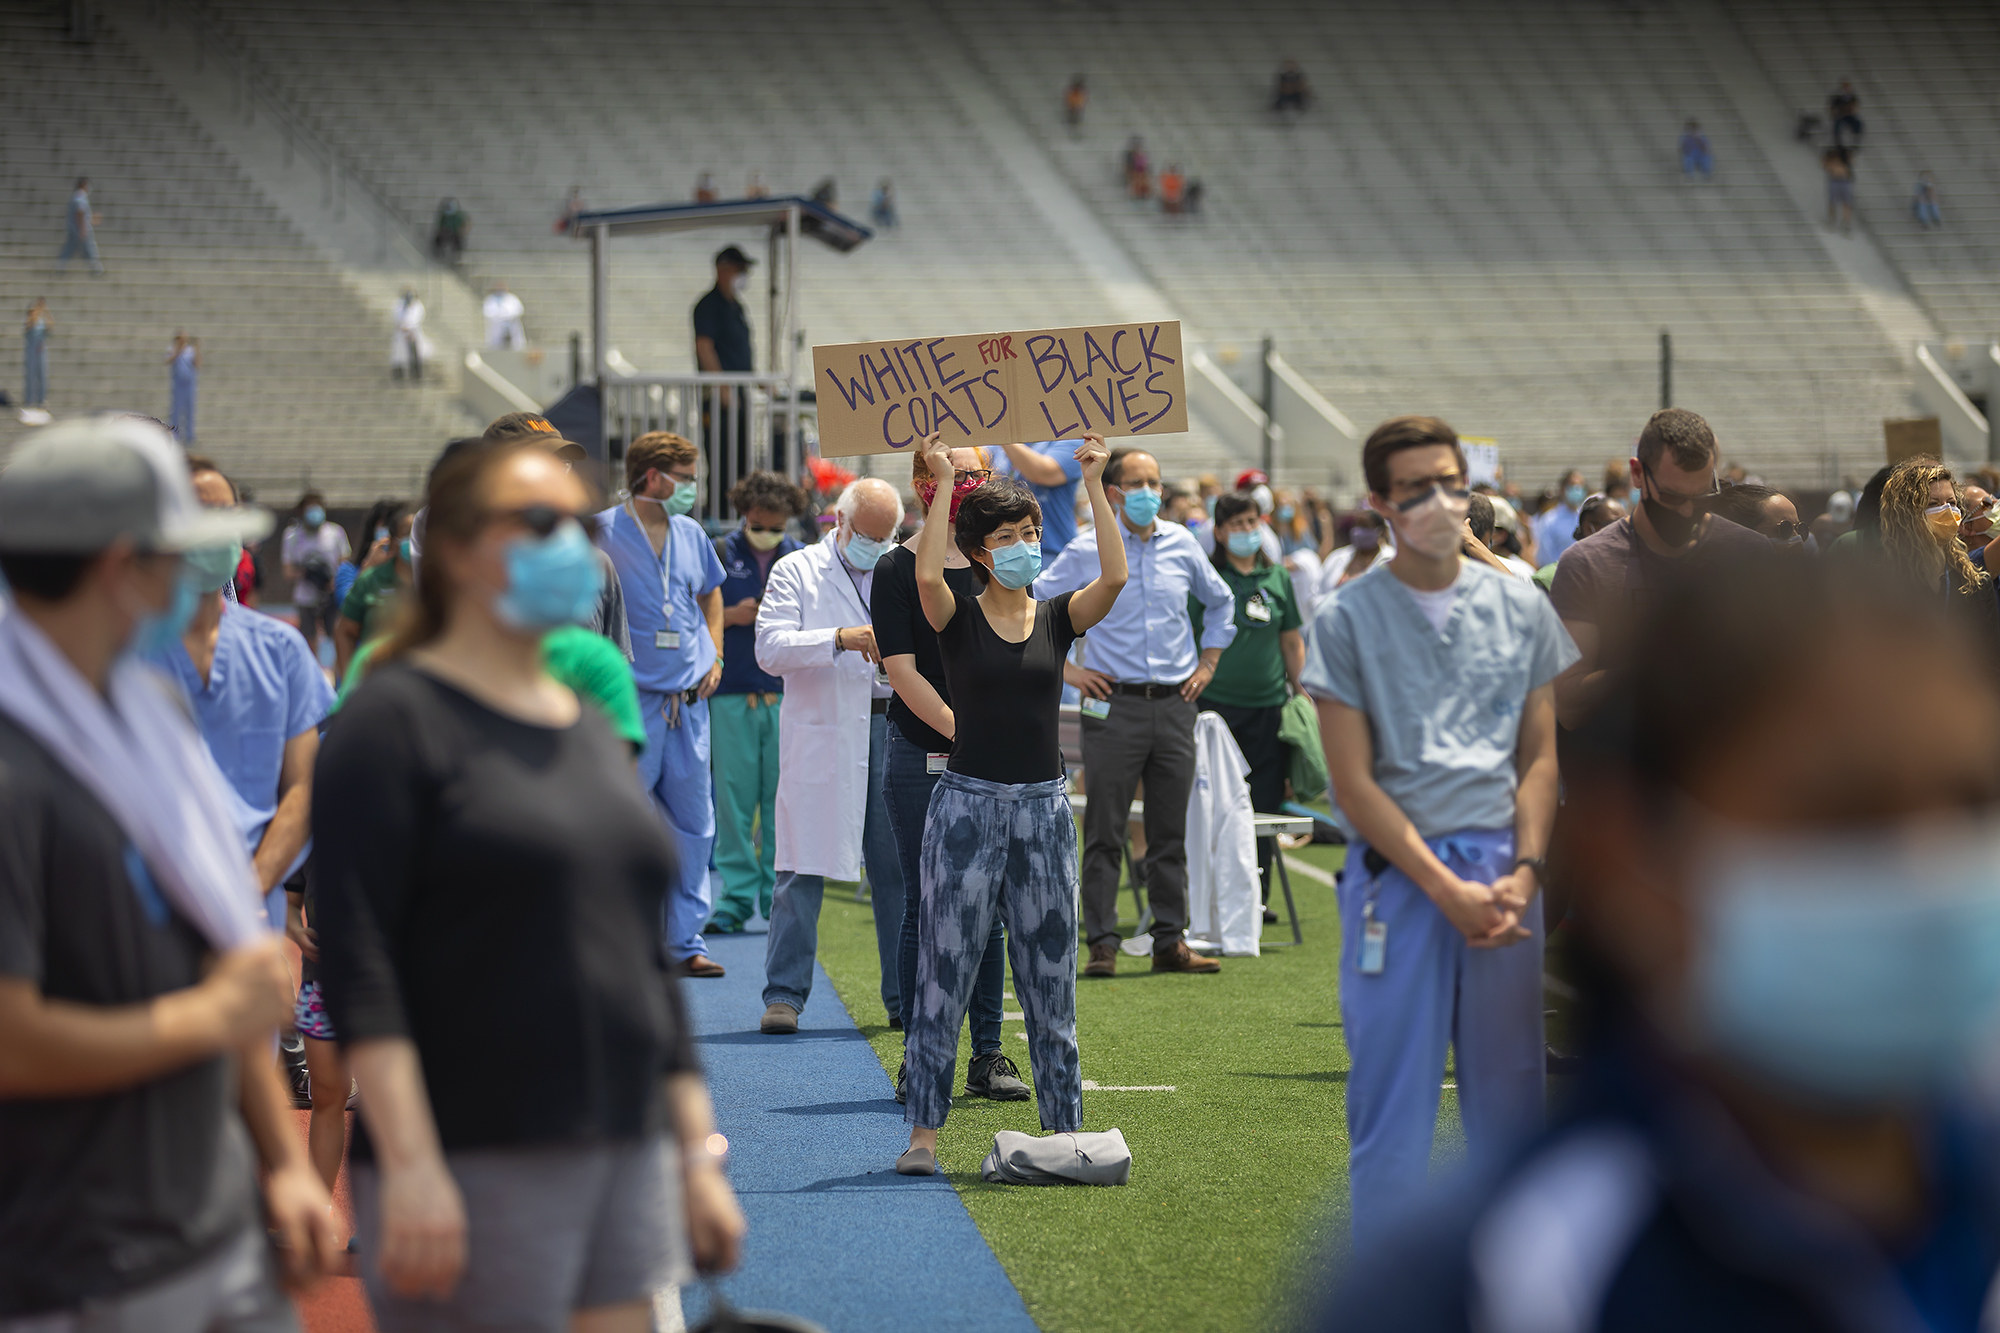 A crowd of health care personnel wearing protective face masks stand on Franklin Field in support of Black Lives Matter, one person holds a sign that reads White Coats for Black Lives.